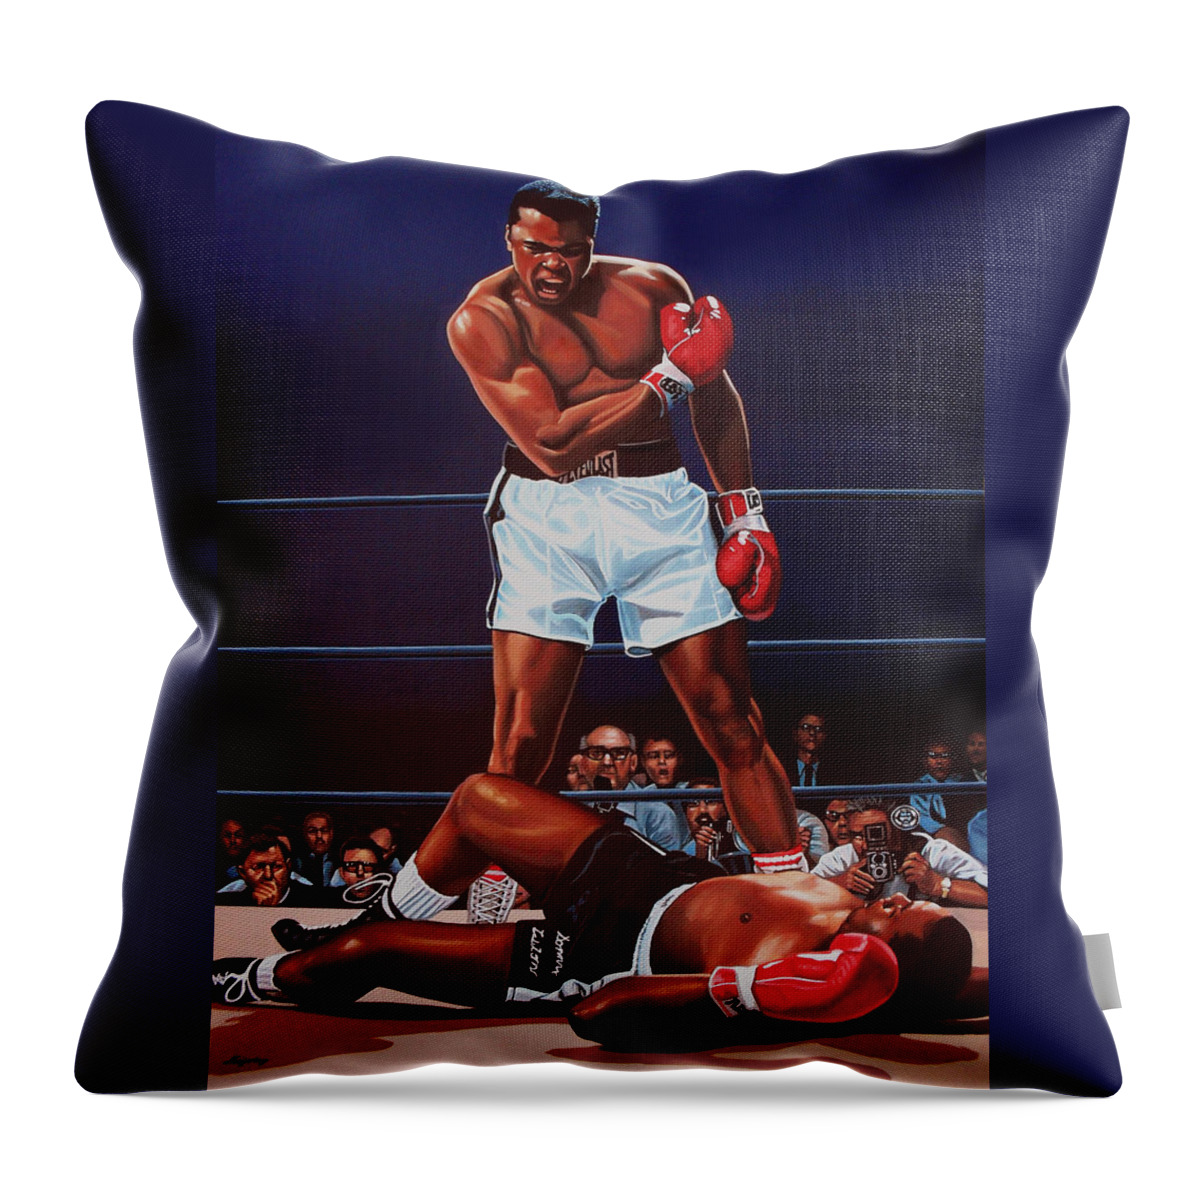 Mohammed Ali Versus Sonny Liston Muhammad Ali Paul Meijering Boxing Boxer Prizefighter Mohammed Ali Ali Sonny Liston Cassius Clay Big Bear The Greatest Boxing Champion The People's Champion The Louisville Lip Knockout Paul Meijering Wbc World Champions Heavyweight Boxing Champions Athlete Icon Portrait Realism Sport Heavyweight Adventure Down Sportsman Hero Painting Canvas Realistic Painting Art Artwork Work Of Art Realistic Art Ring Celebrity Celebrities Throw Pillow featuring the painting Muhammad Ali versus Sonny Liston by Paul Meijering